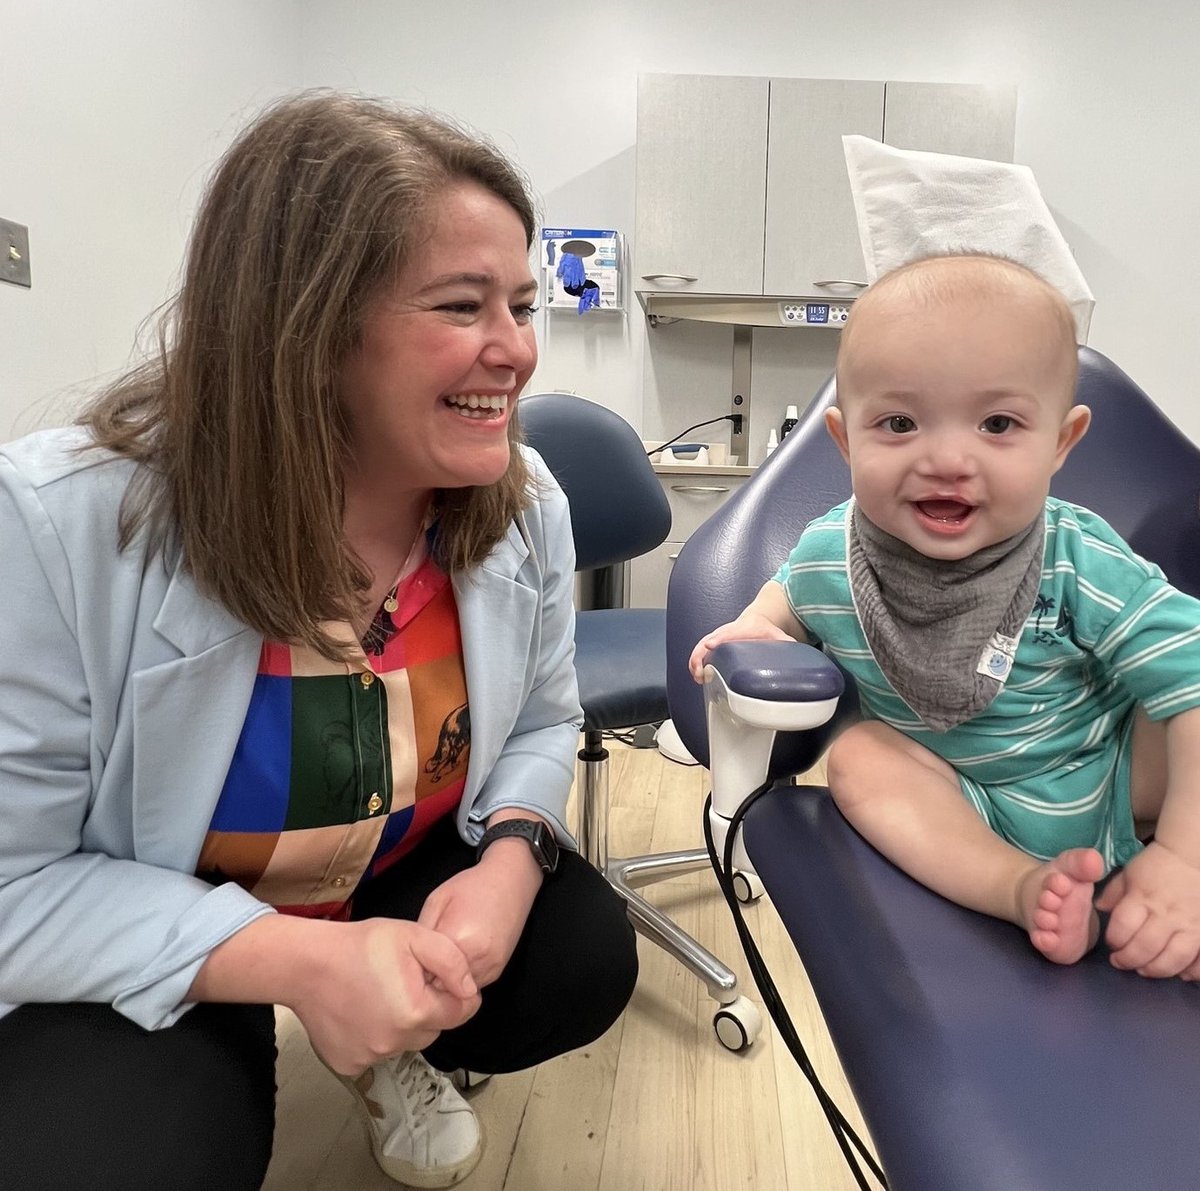 HCA Healthcare recognizes our more than 309,000 colleagues for the commitment, compassion and care they show for our patients by observing #PatientExperienceWeek. Learn about how HCA Healthcare colleagues create special moments for patients, like Wyatt: bit.ly/3UKiEyu.